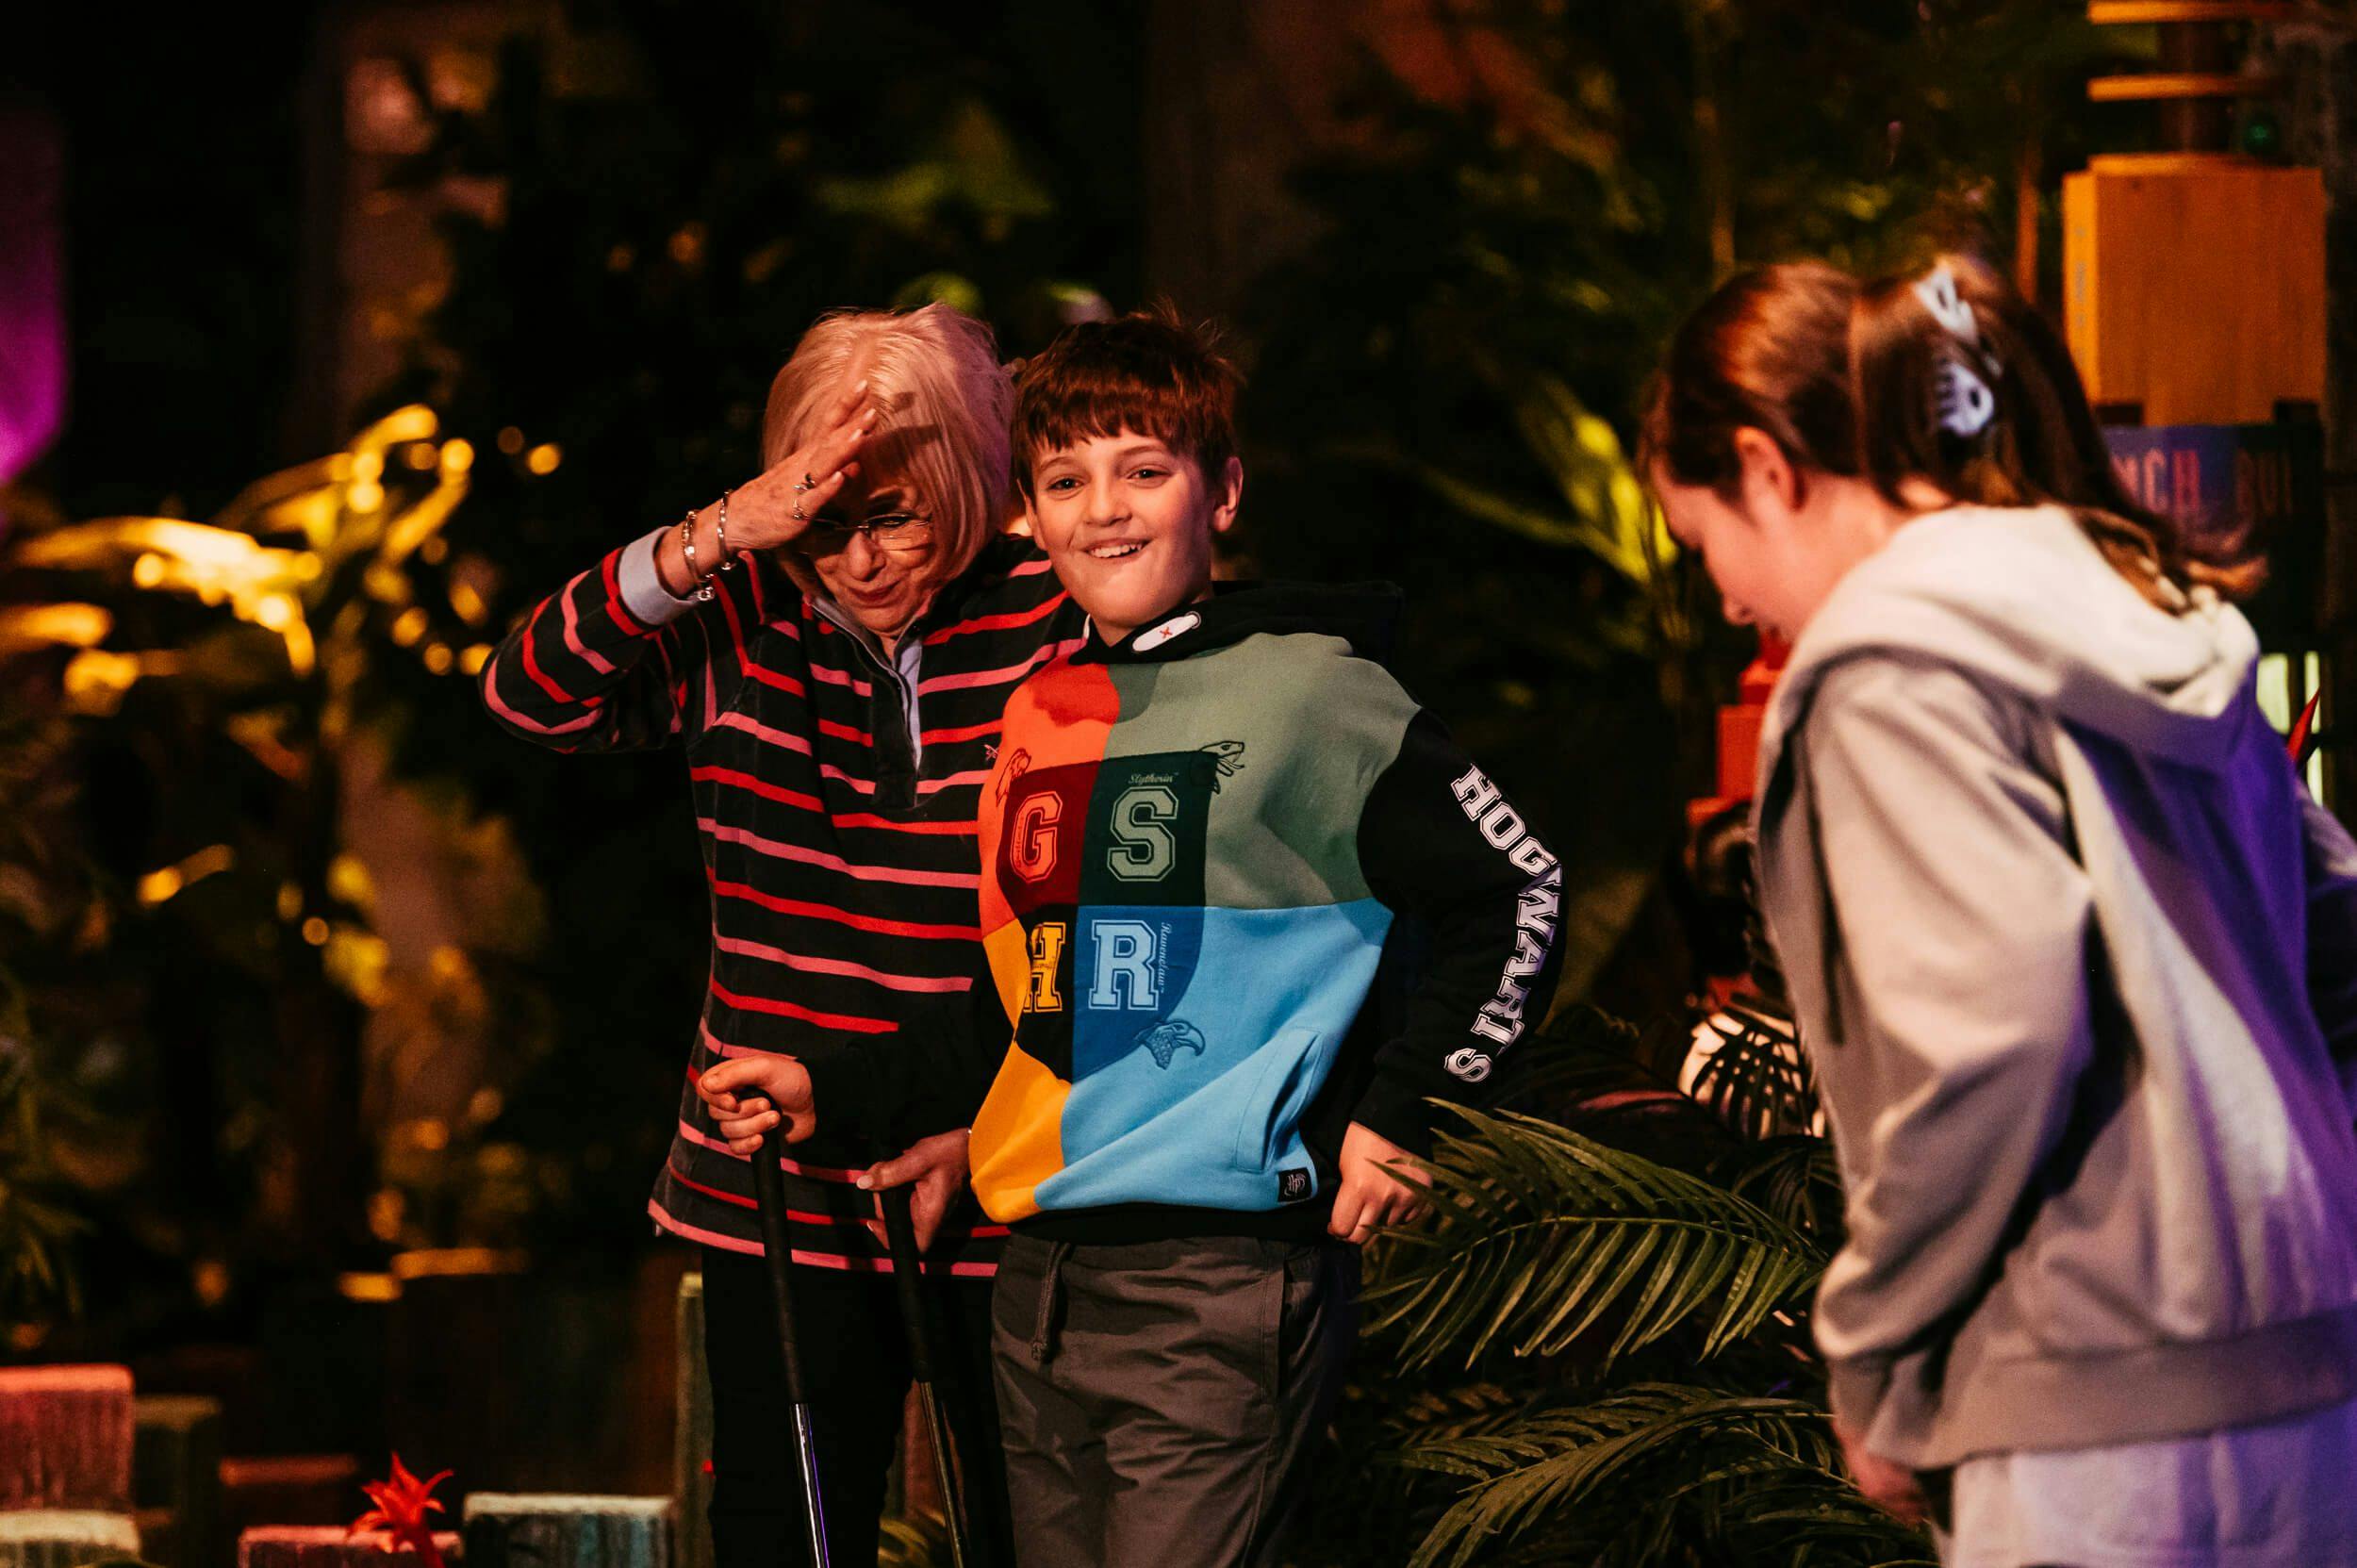 A young boy wearing a Harry Potter sweatshirt and his family roam the Treetop jungle with their mini golf clubs in hand. 